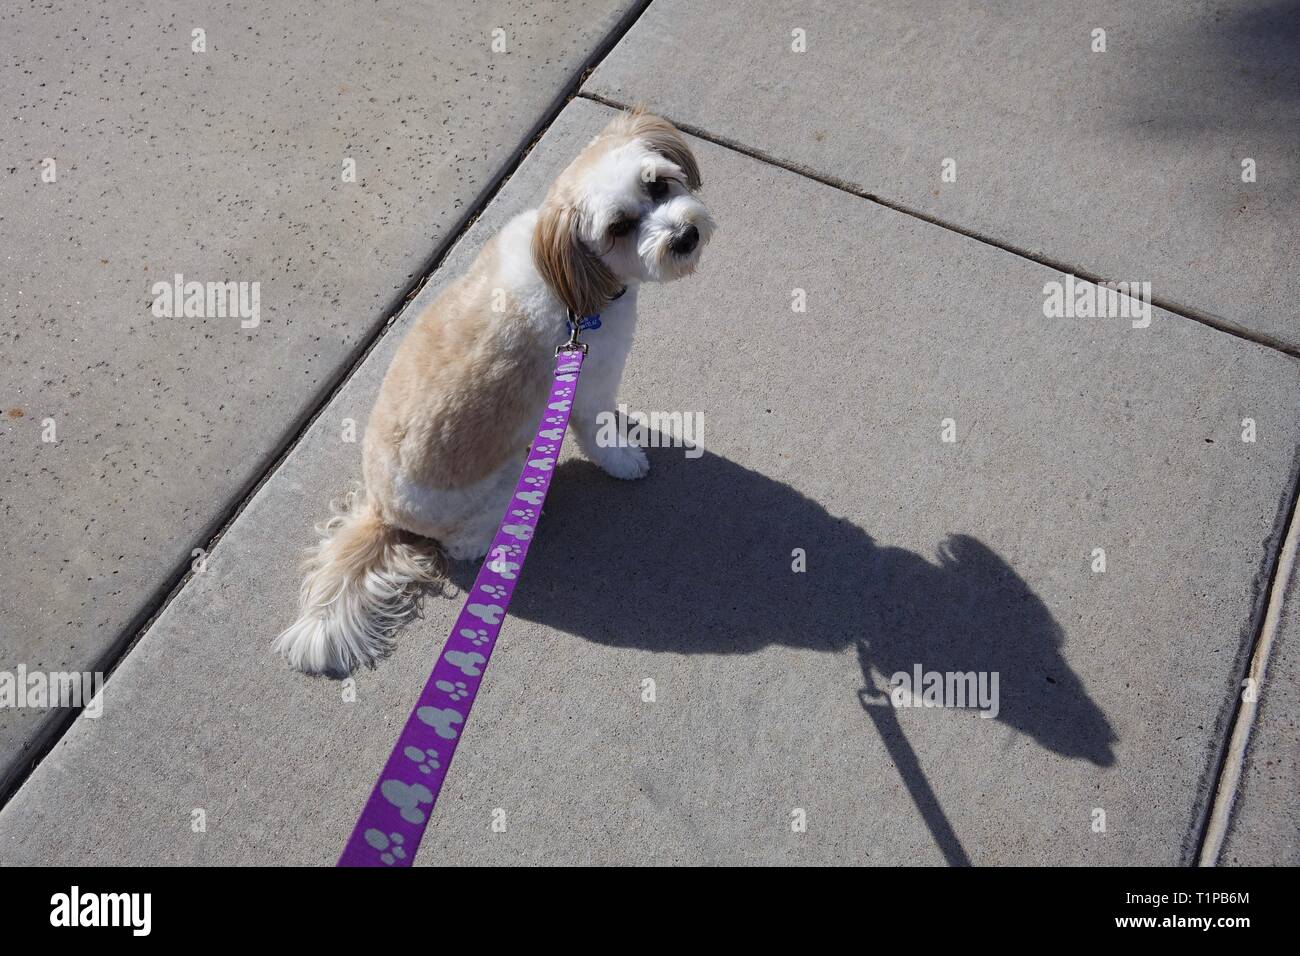 A dog goes for a walk while wearing a leash. Stock Photo